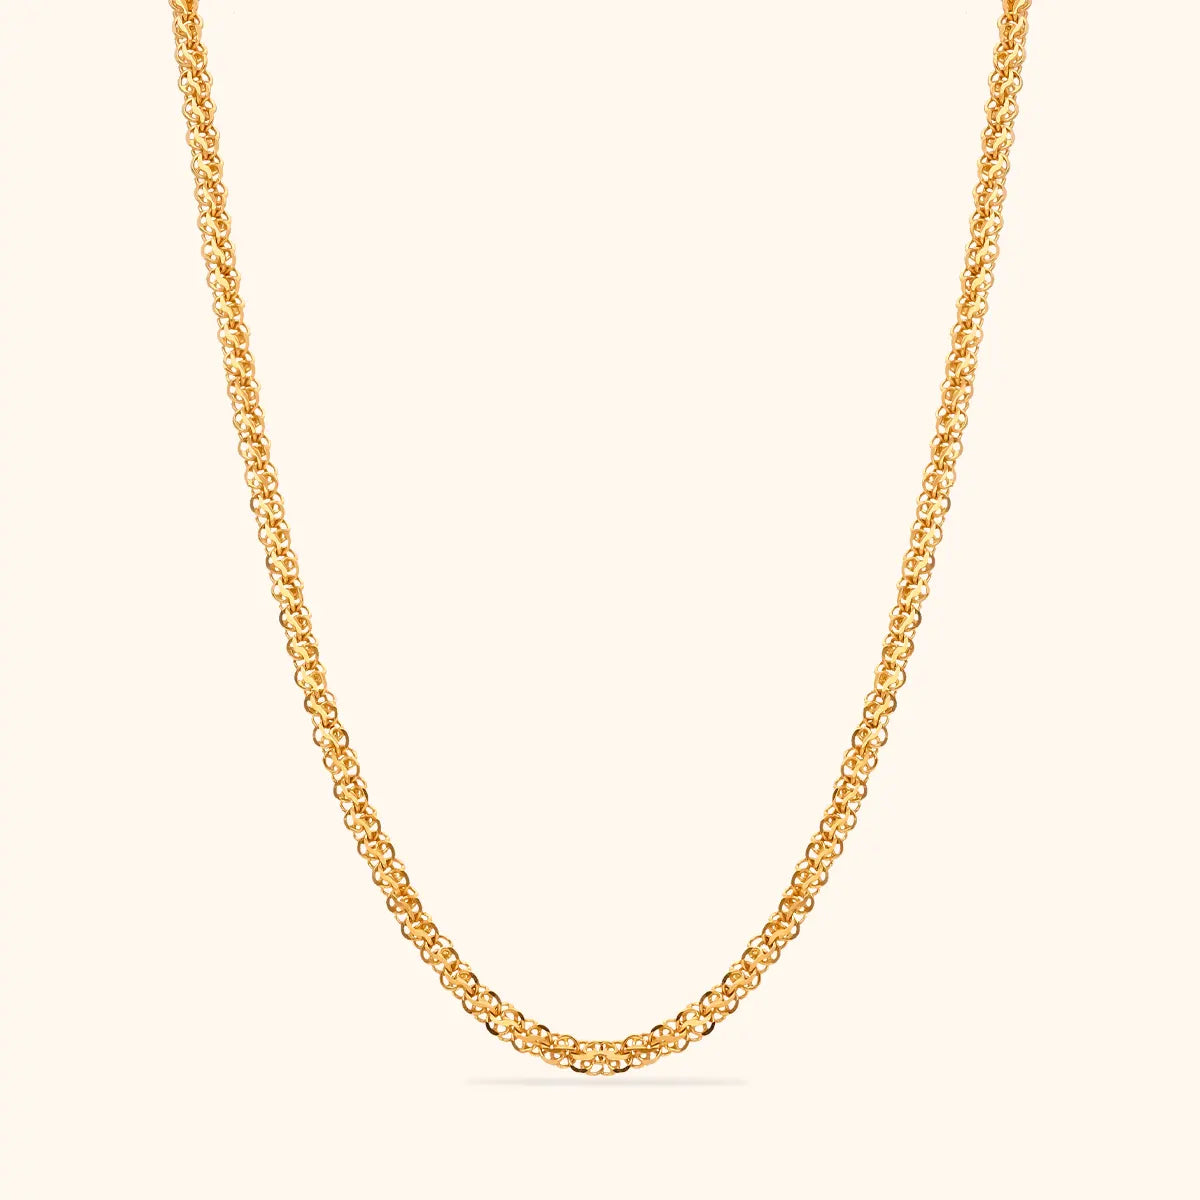 mens gold chain online shopping india